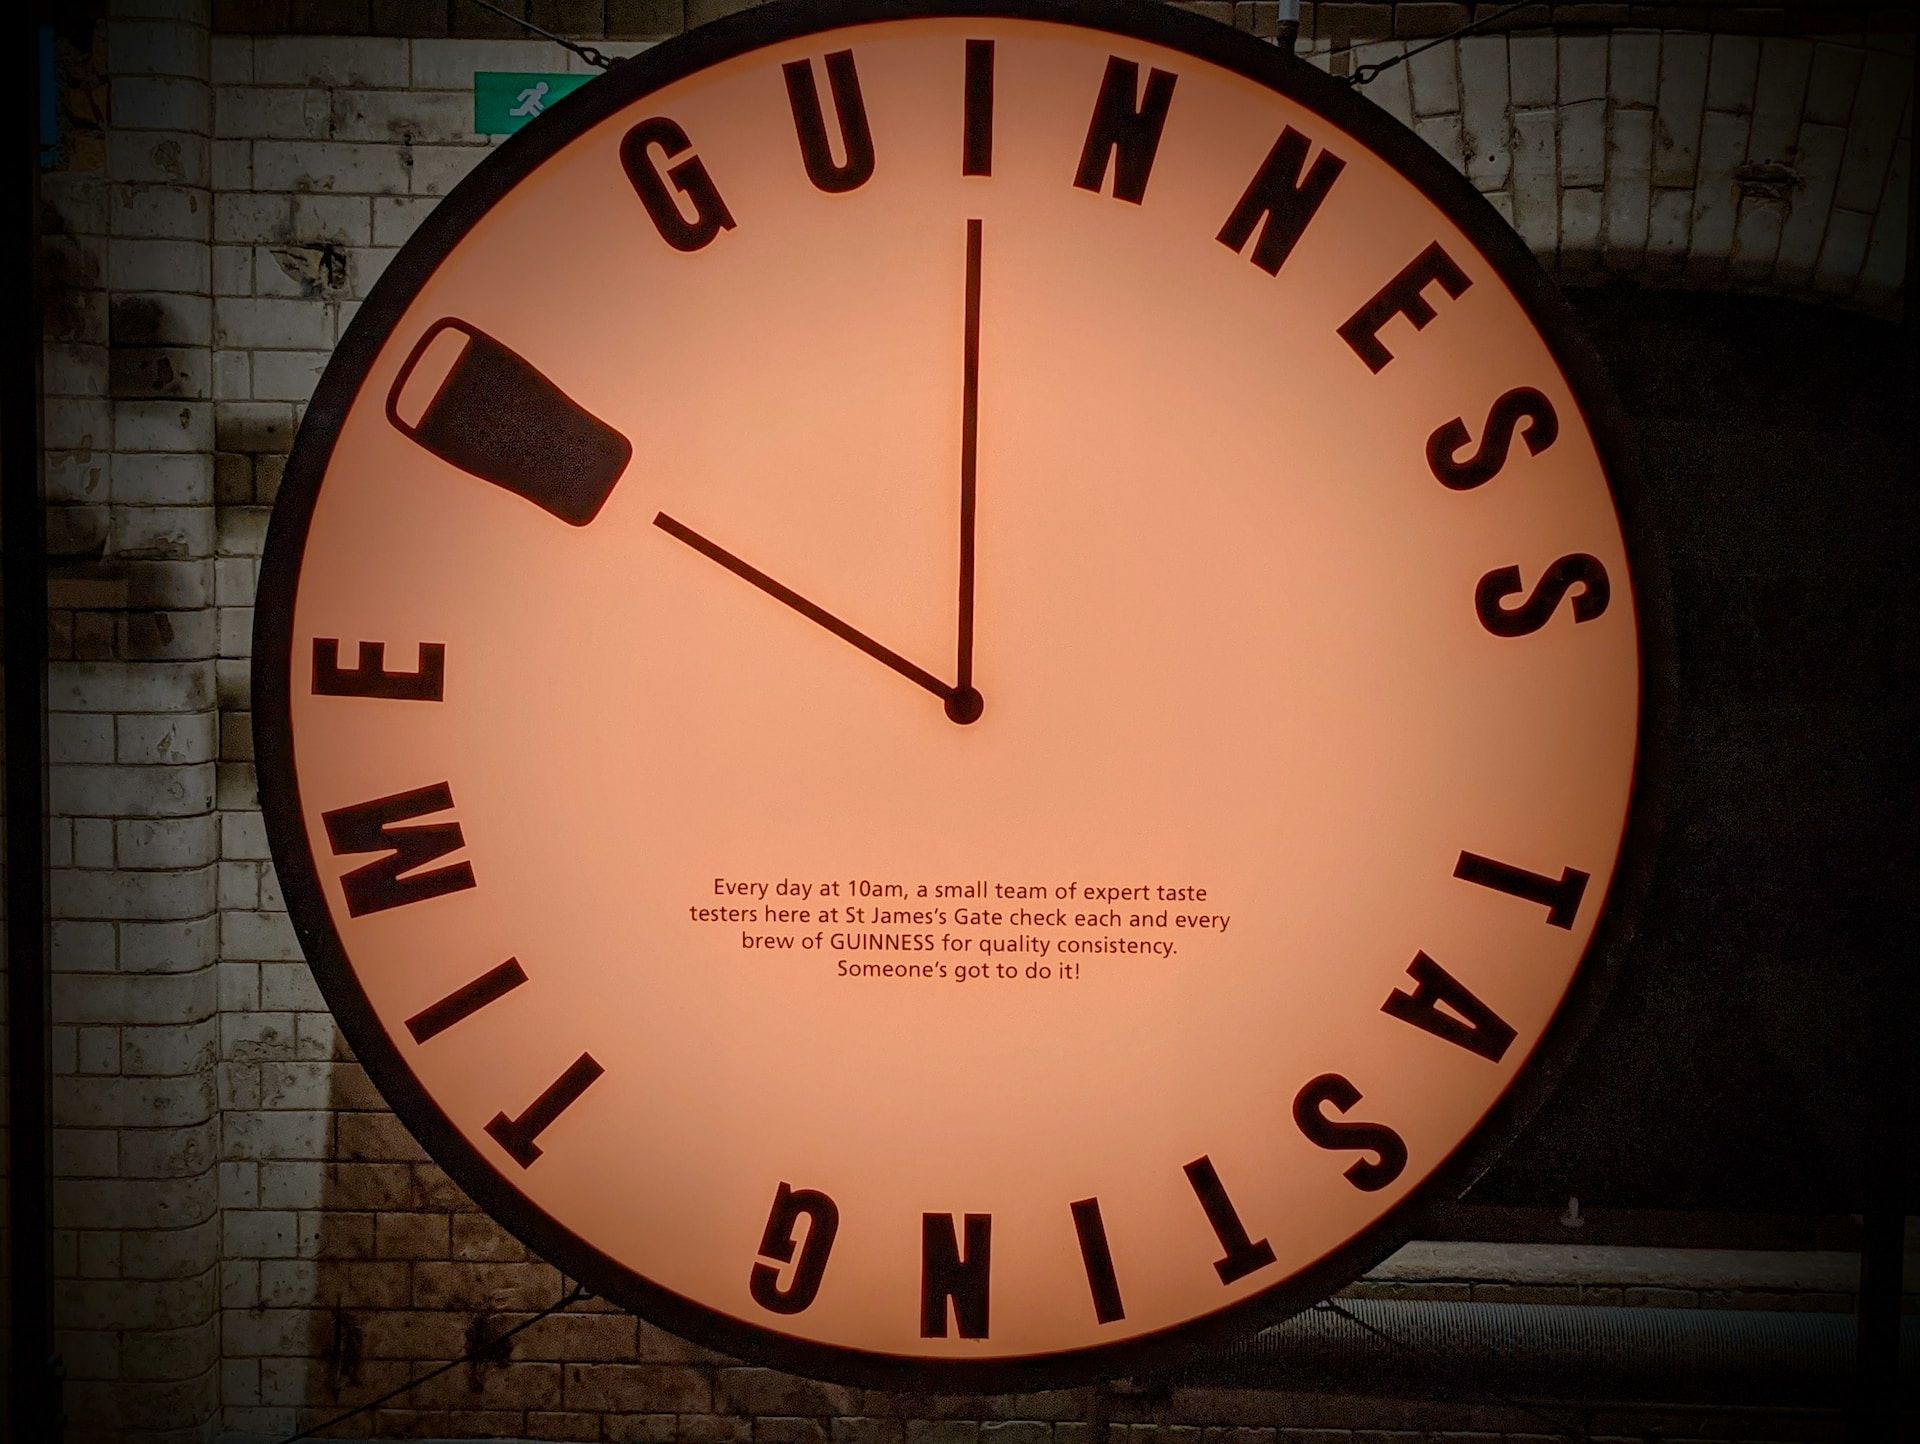 Clock with "Guinness tasting time" around the edge